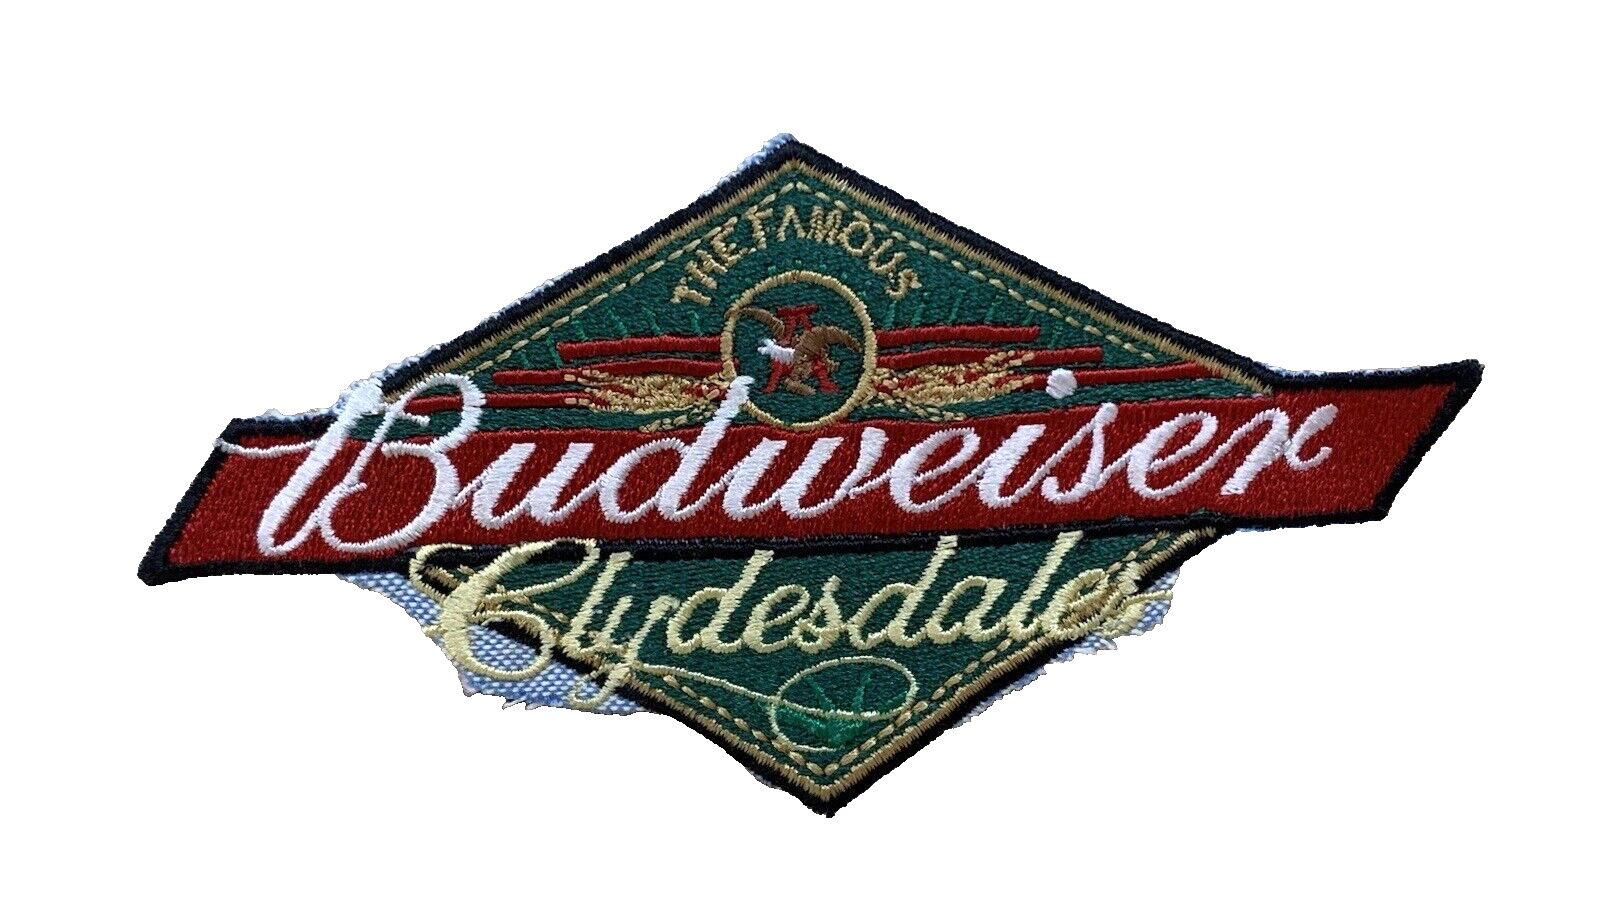 BUDWEISER Iron On CLYDESDALE Embroidered Sew On Patch, Horses, Beer 4.5\